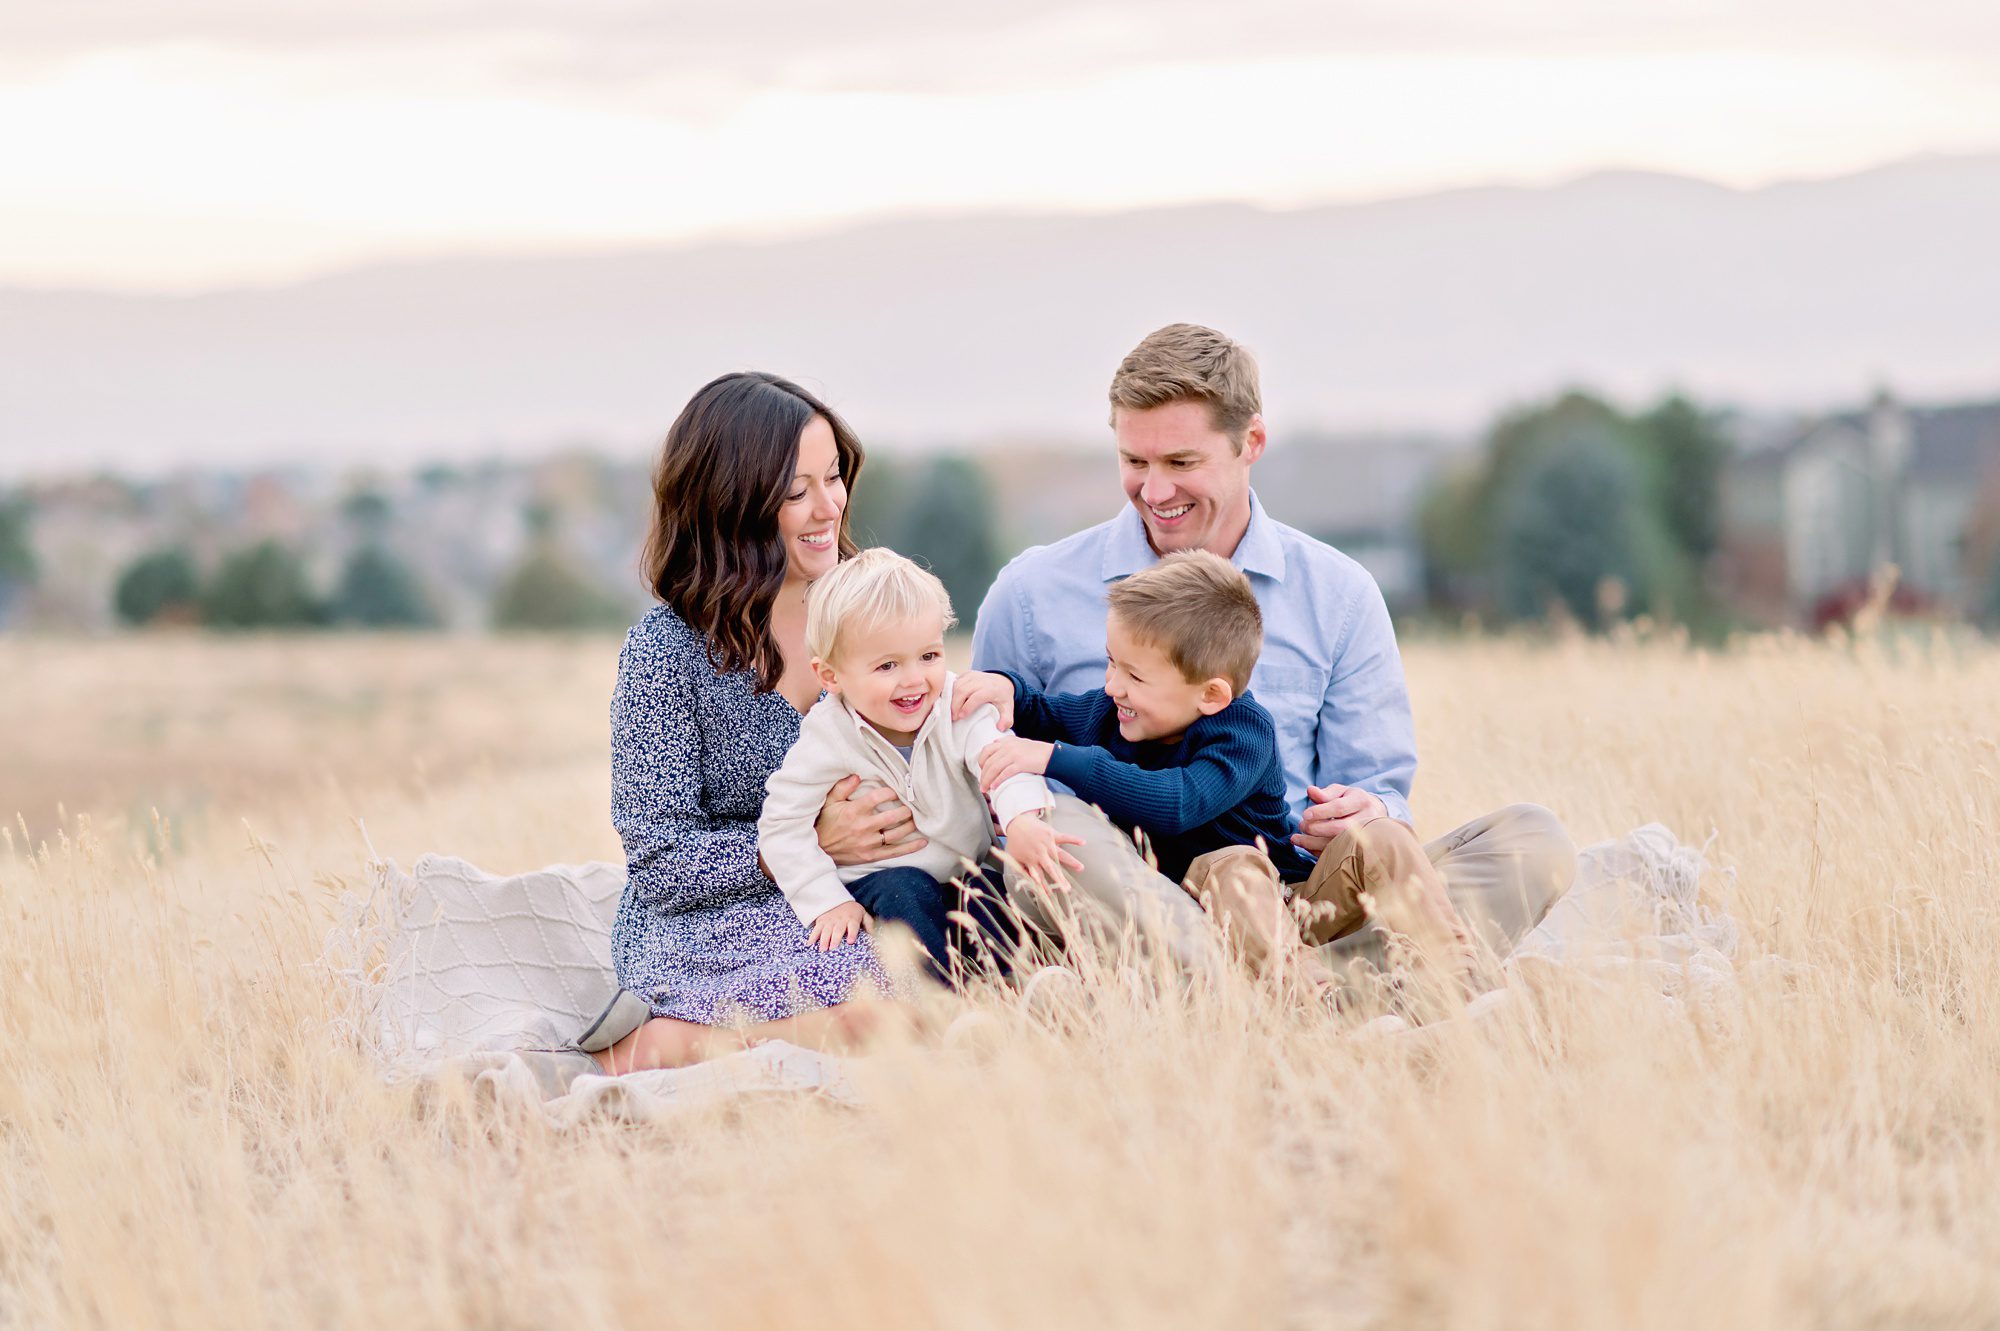 A family of 4 with 2 young boys get family photos taken in a field in Highlands Ranch, CO with a beautiful sunset and mountain backdrop.